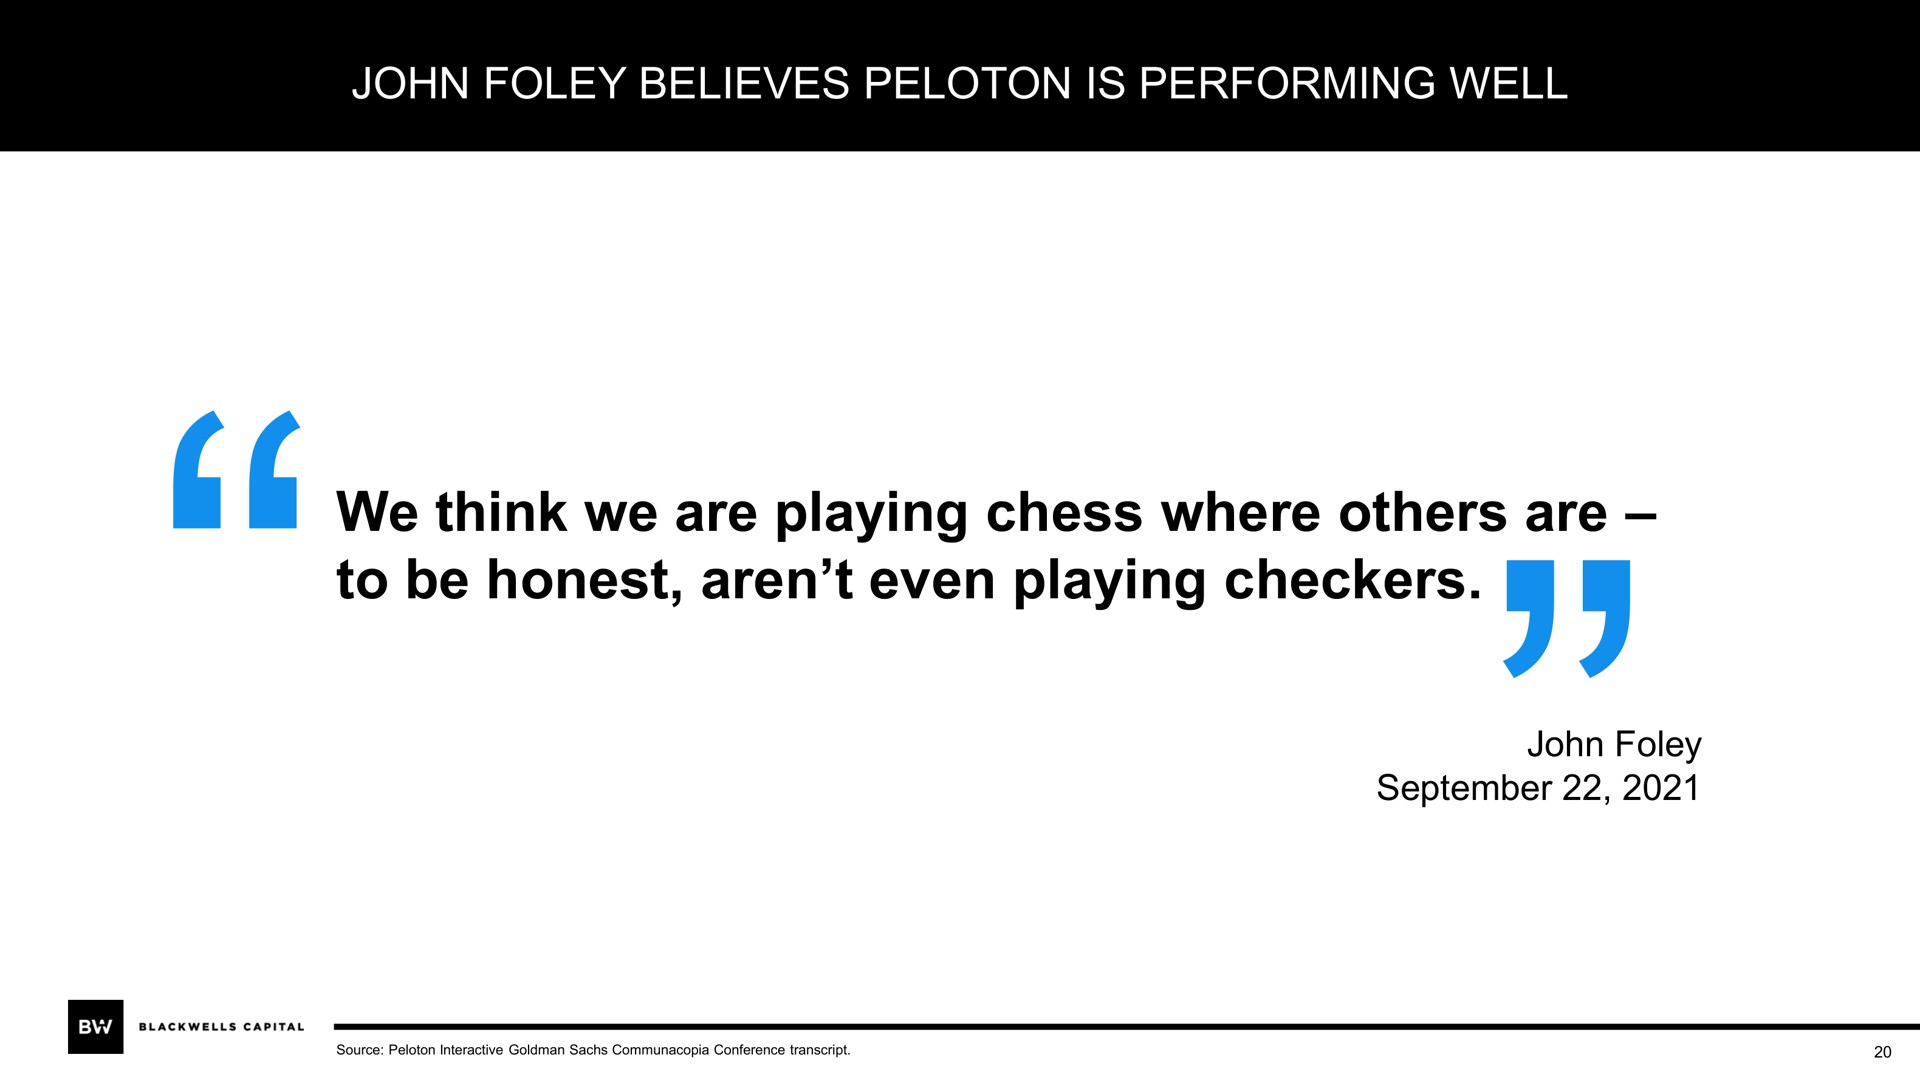 believes peloton is performing well we think we are playing chess where are to be honest even playing checkers | Blackwells Capital